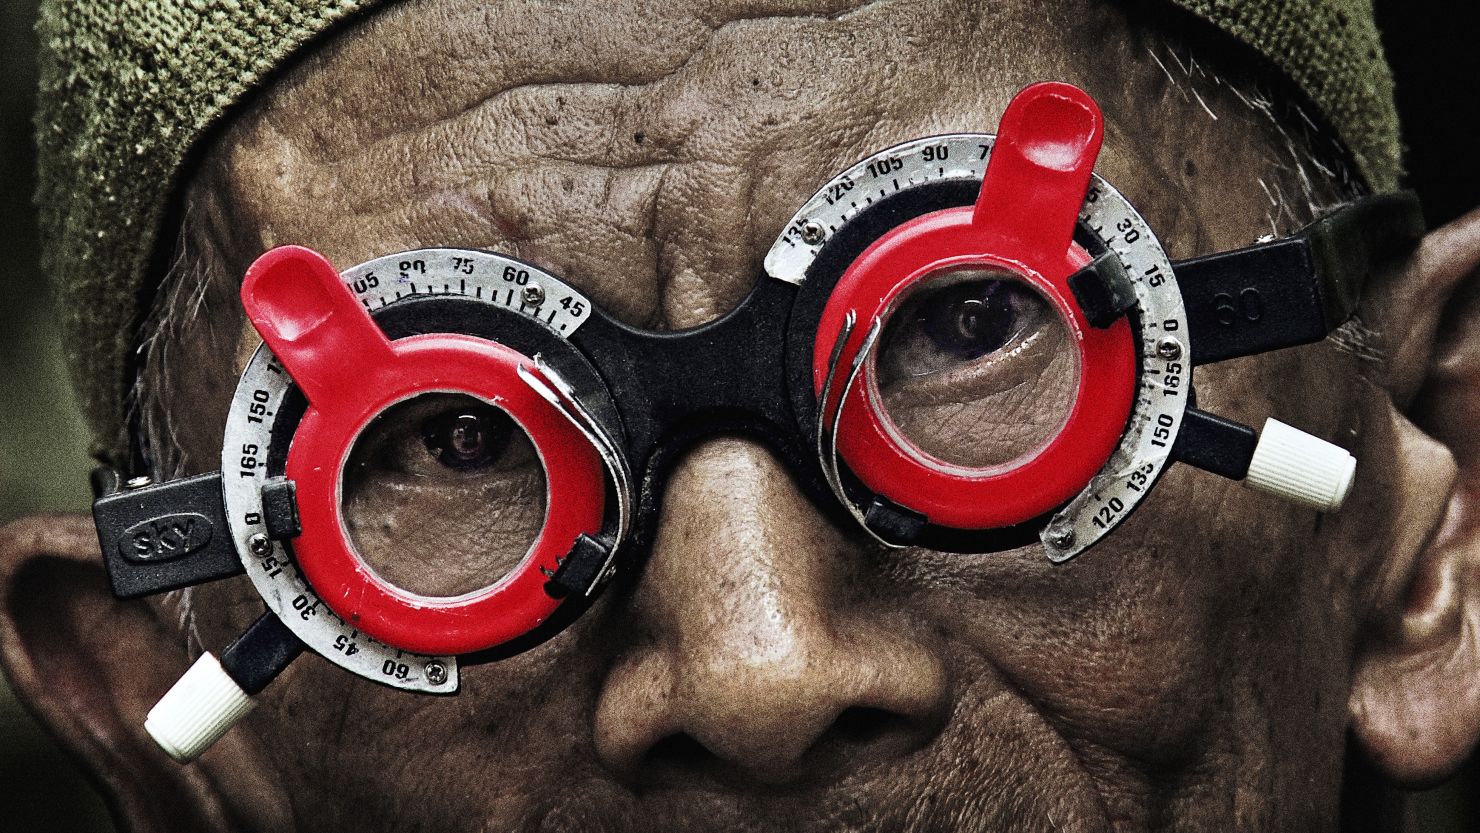 Skewed view: "The Look of Silence" examines the little spoken of massacres that took place in Indonesia in 1965 and 1966.